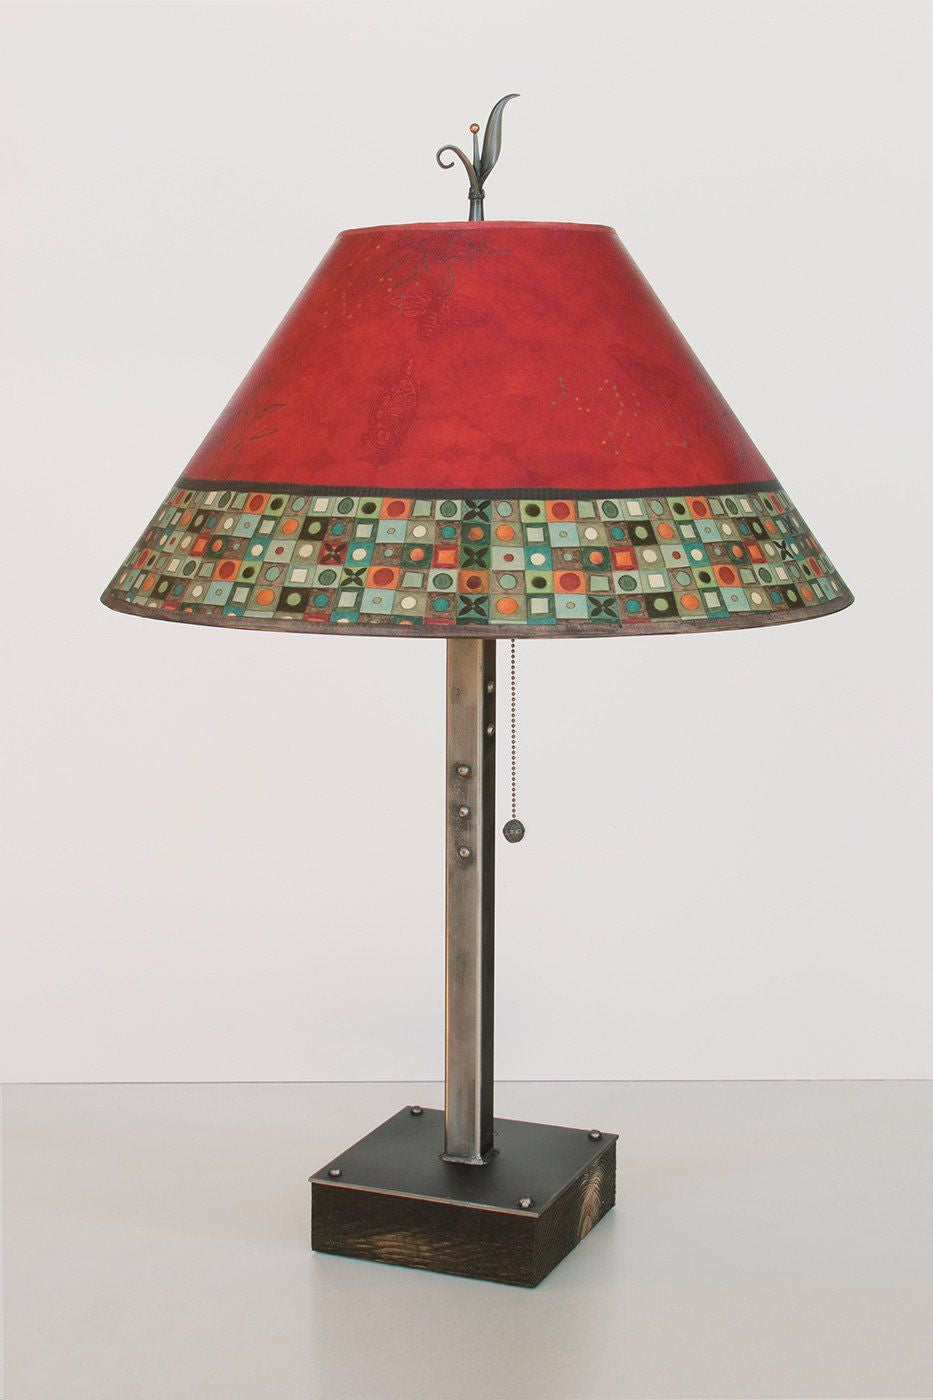 Janna Ugone &amp; Co Table Lamps Steel Table Lamp on Wood with Large Conical Shade in Red Mosaic